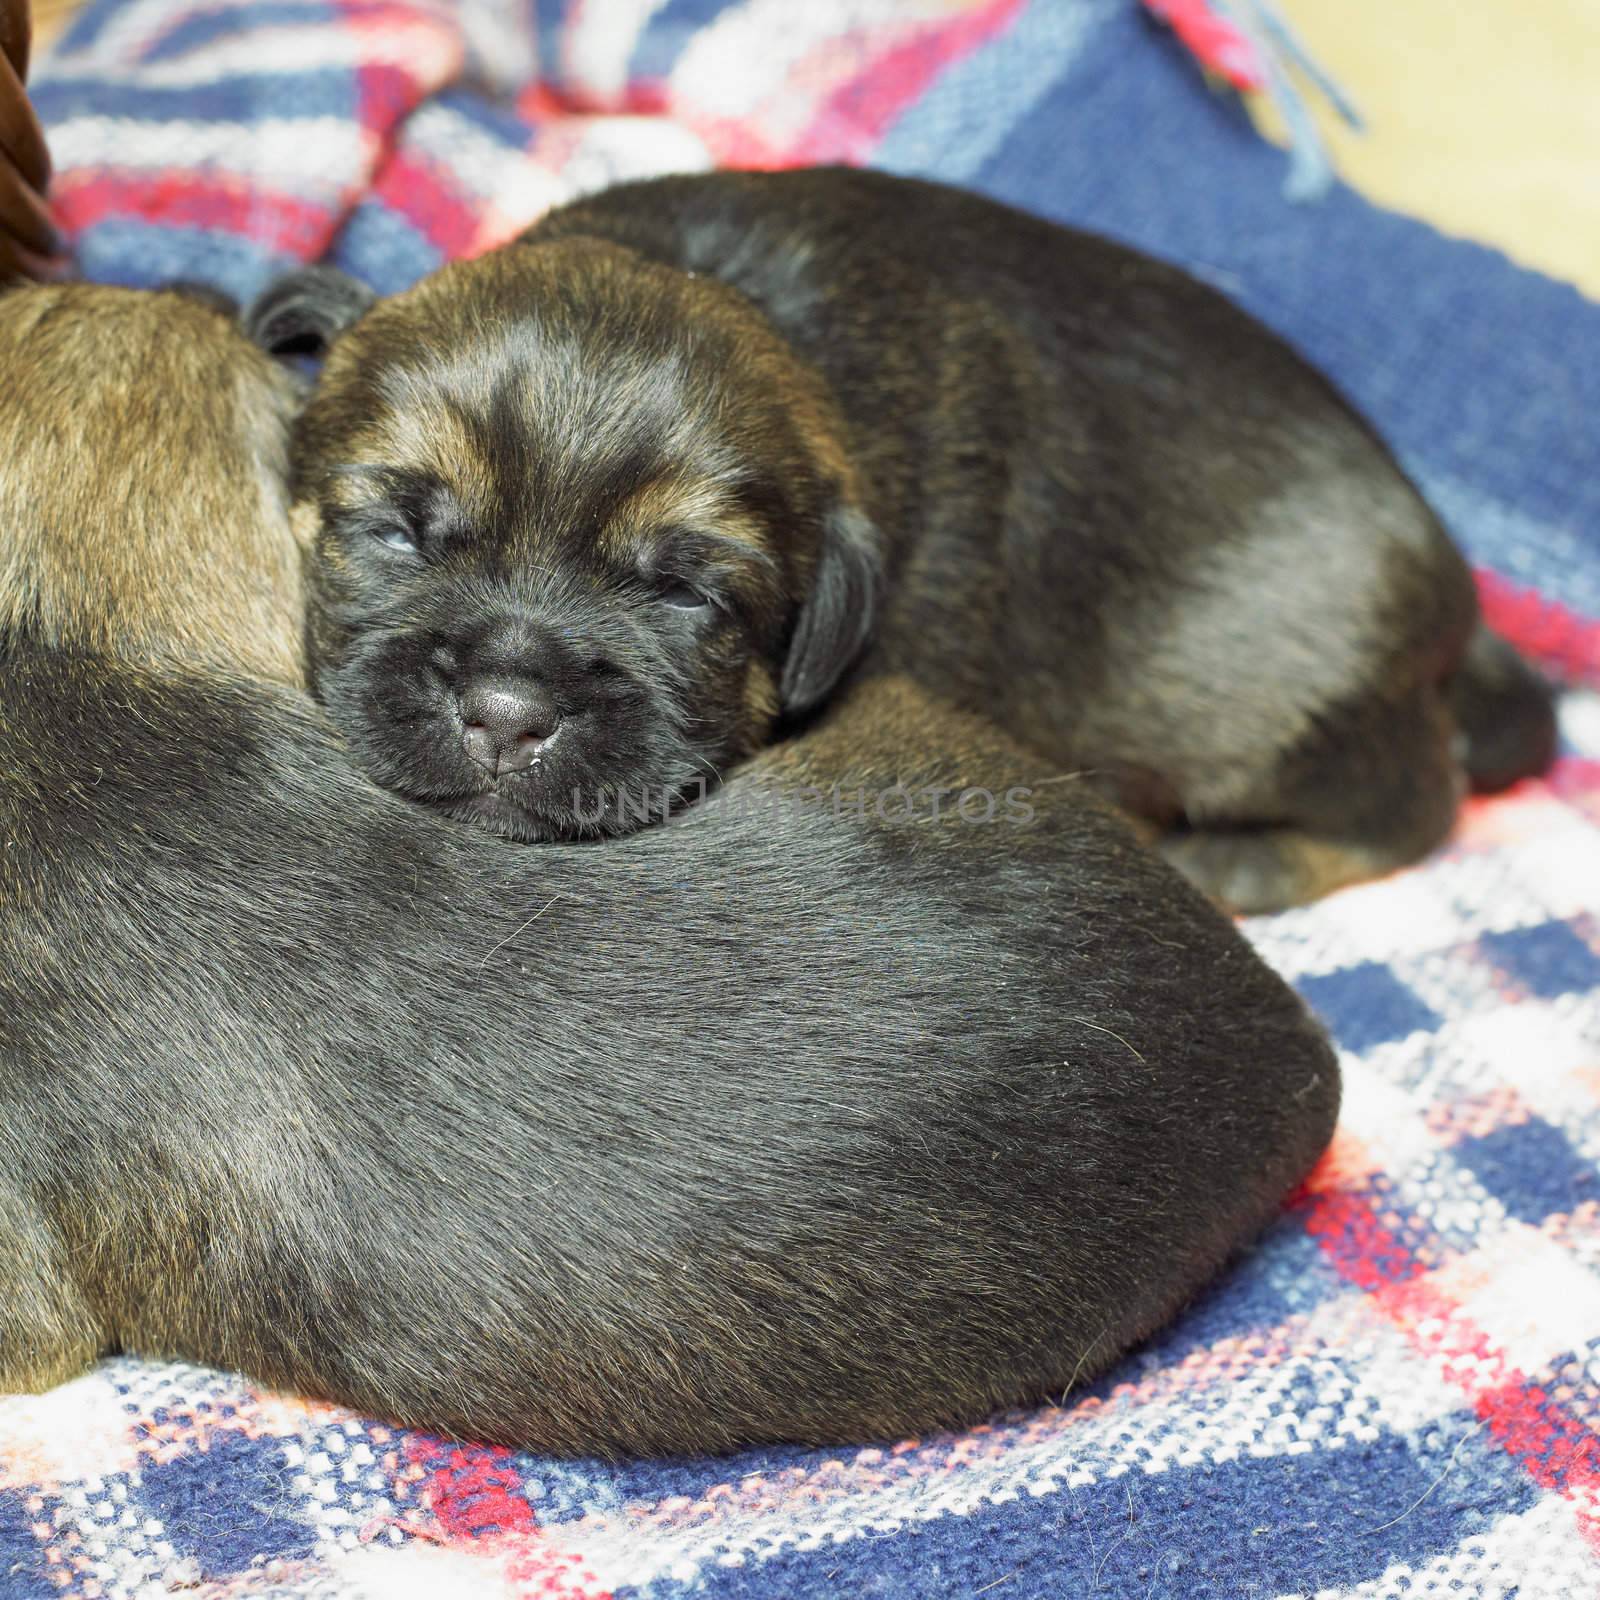 puppies (Border Terrier) by phbcz